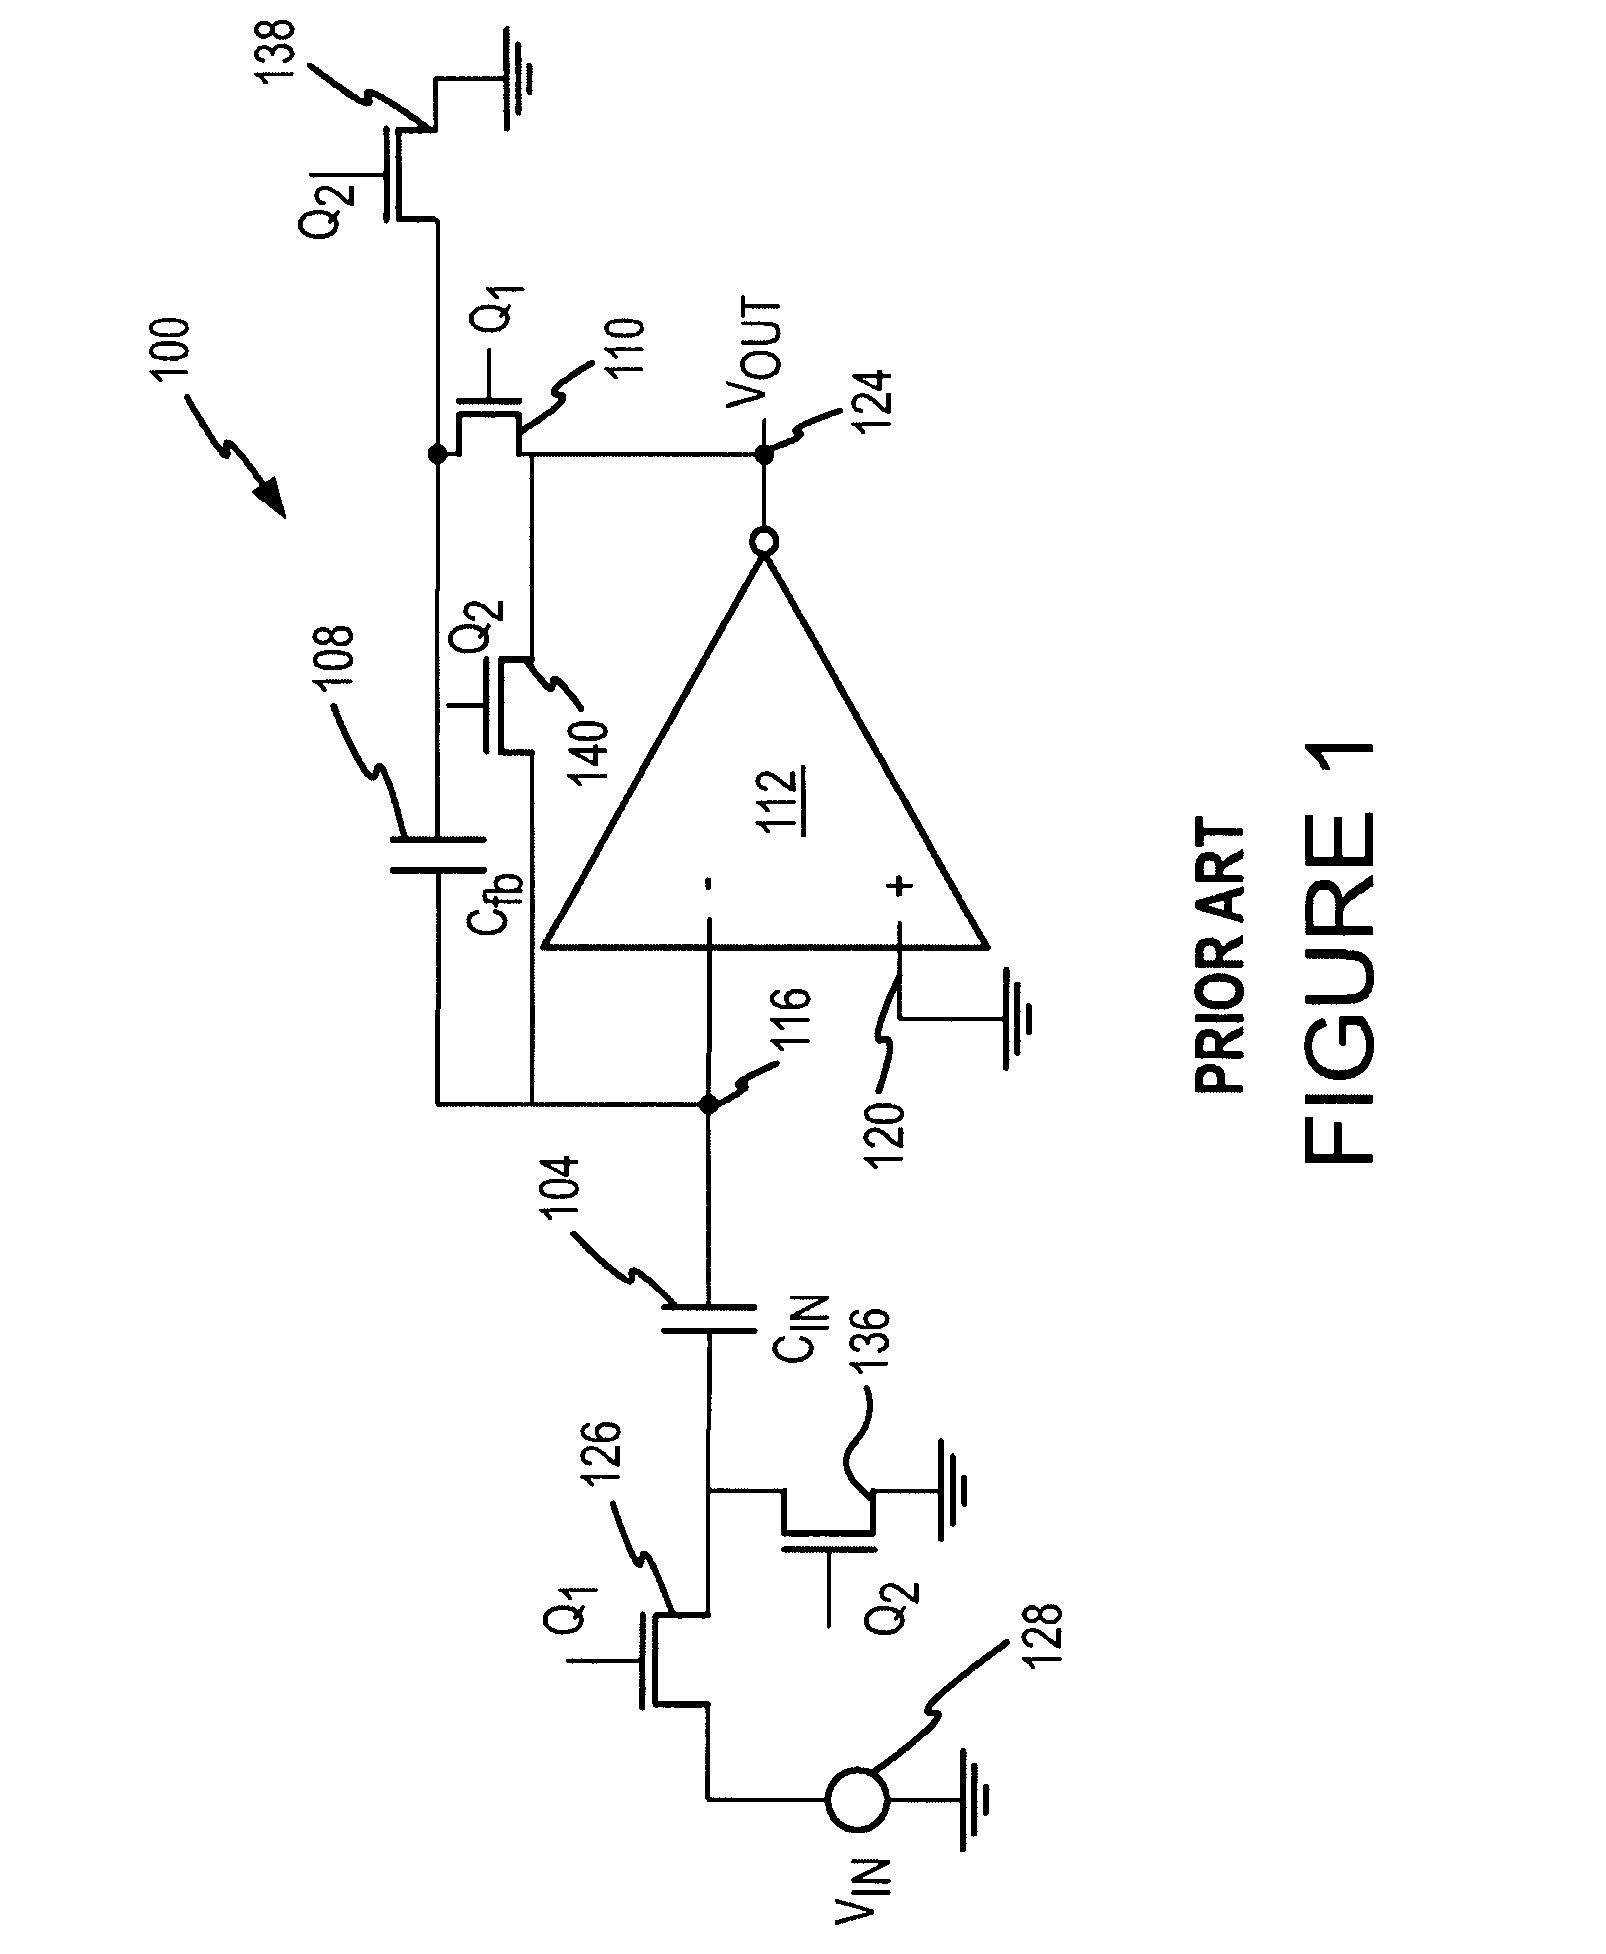 Switched capacitor amplifier with higher gain and improved closed-loop gain accuracy